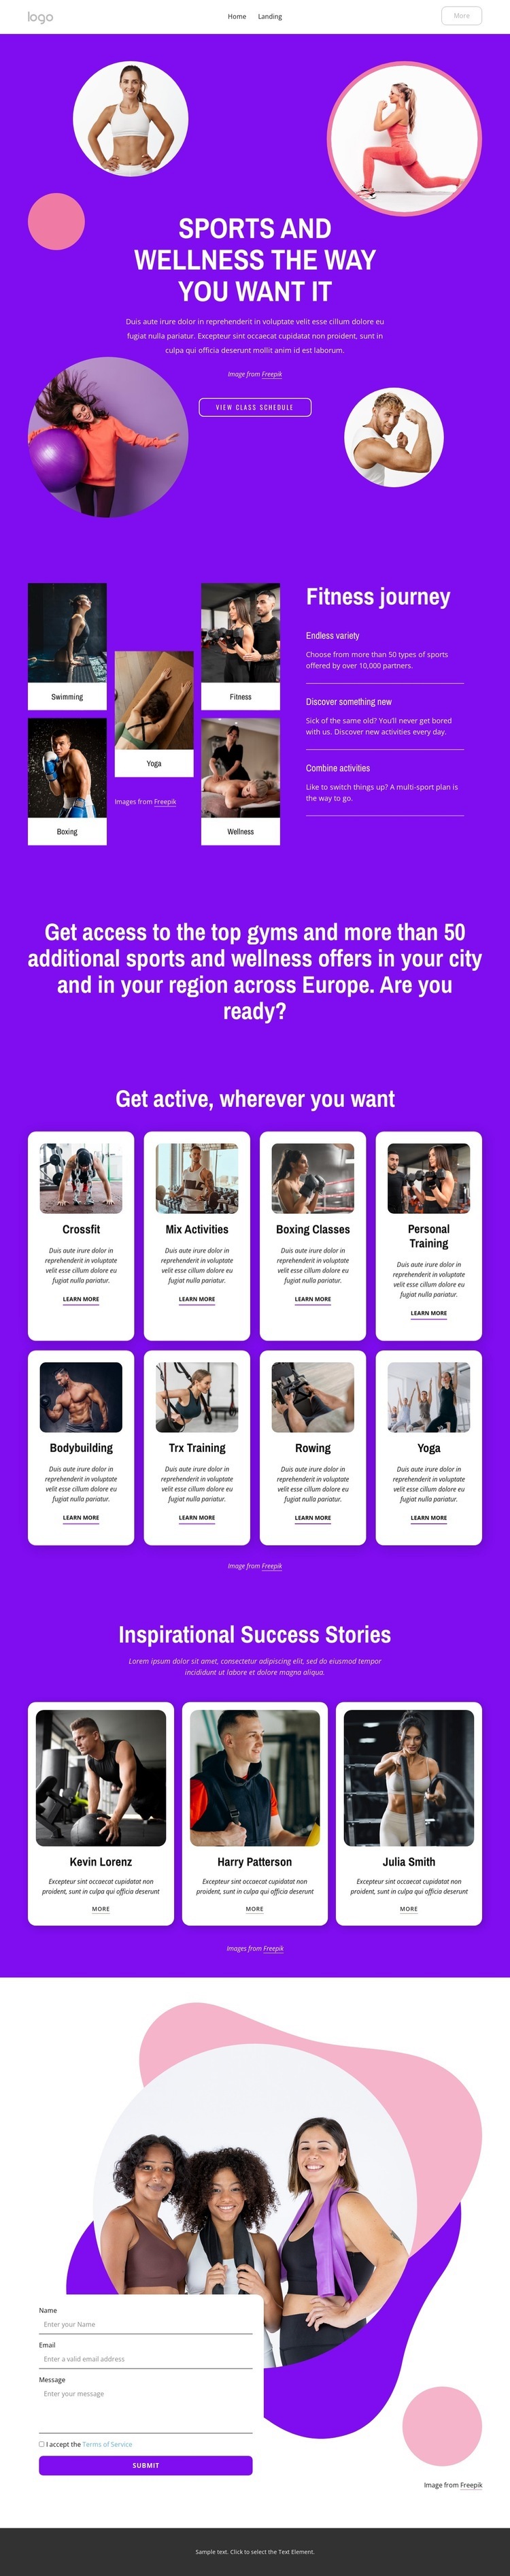 Sports and wellness the way you want it Web Page Design